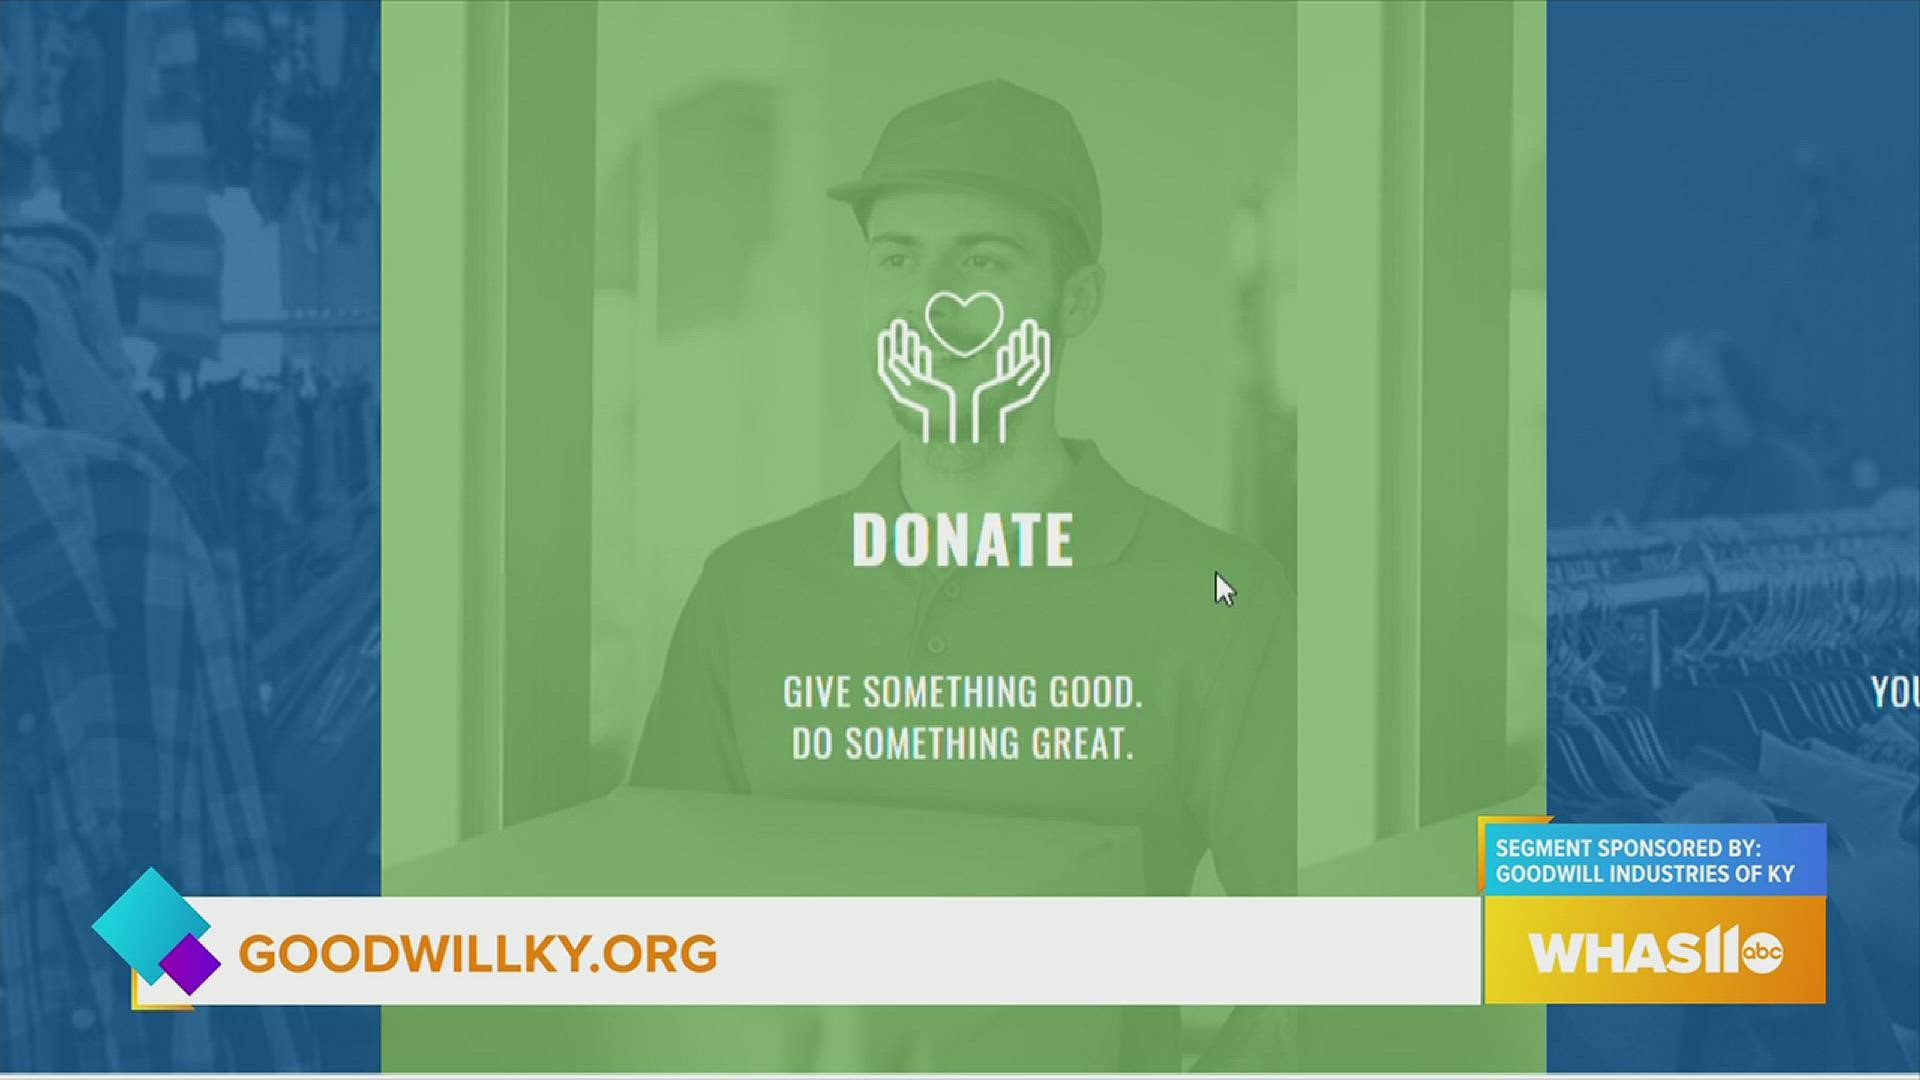 To make an online donation, visit goodwillky.org.